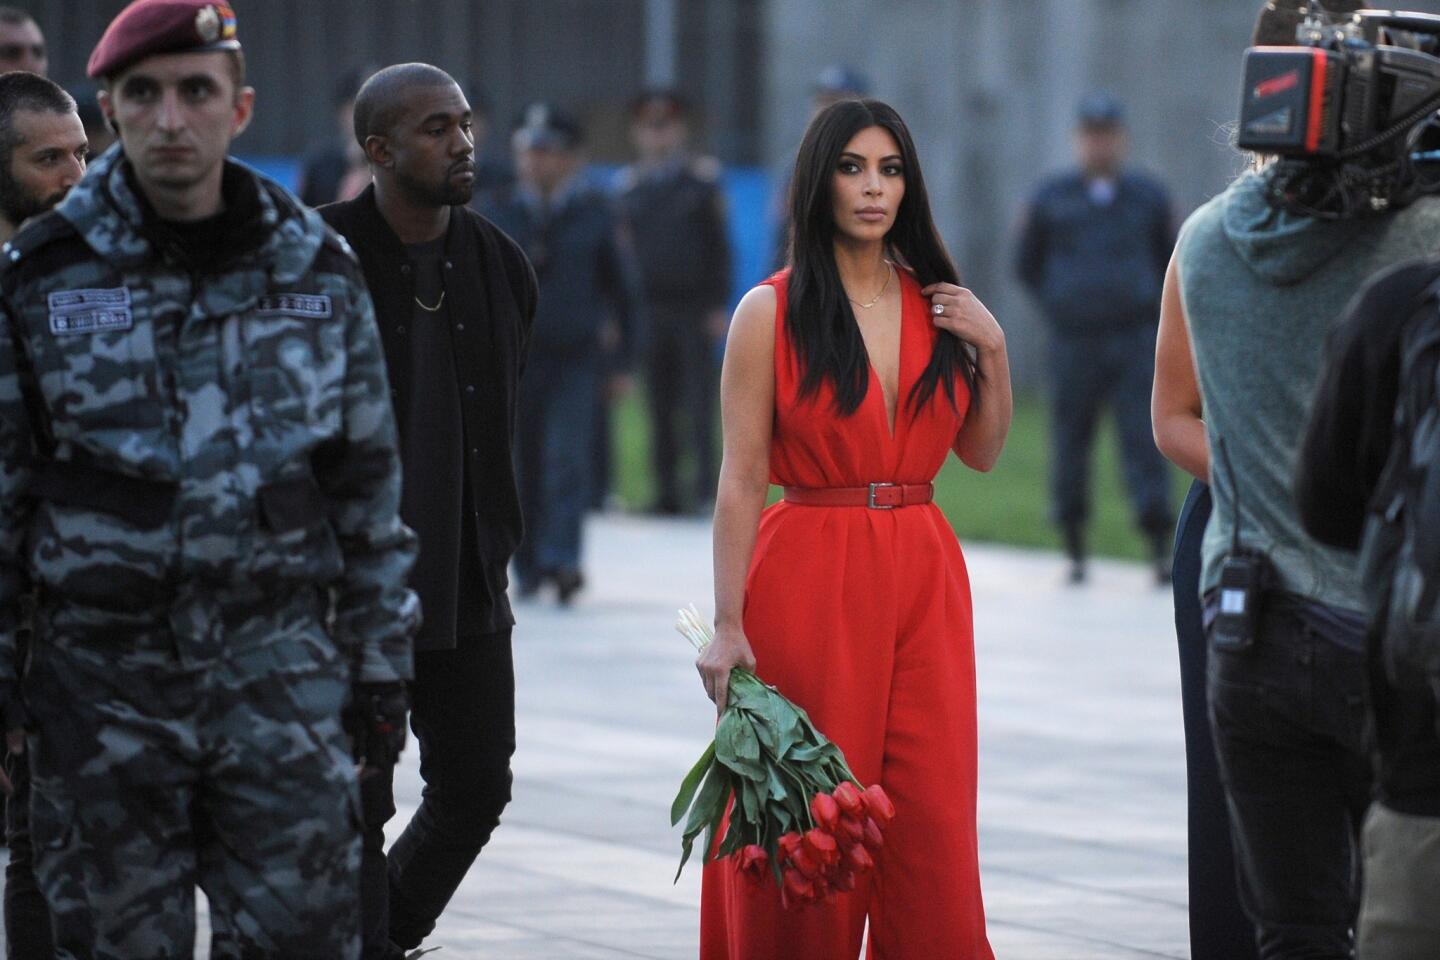 Reality TV star Kim Kardashian (C) and her rapper husband Kanye West (3rdL) visit the genocide memorial, which commemorates the 1915 mass killing of Armenians in the Ottoman Empire, in Yerevan